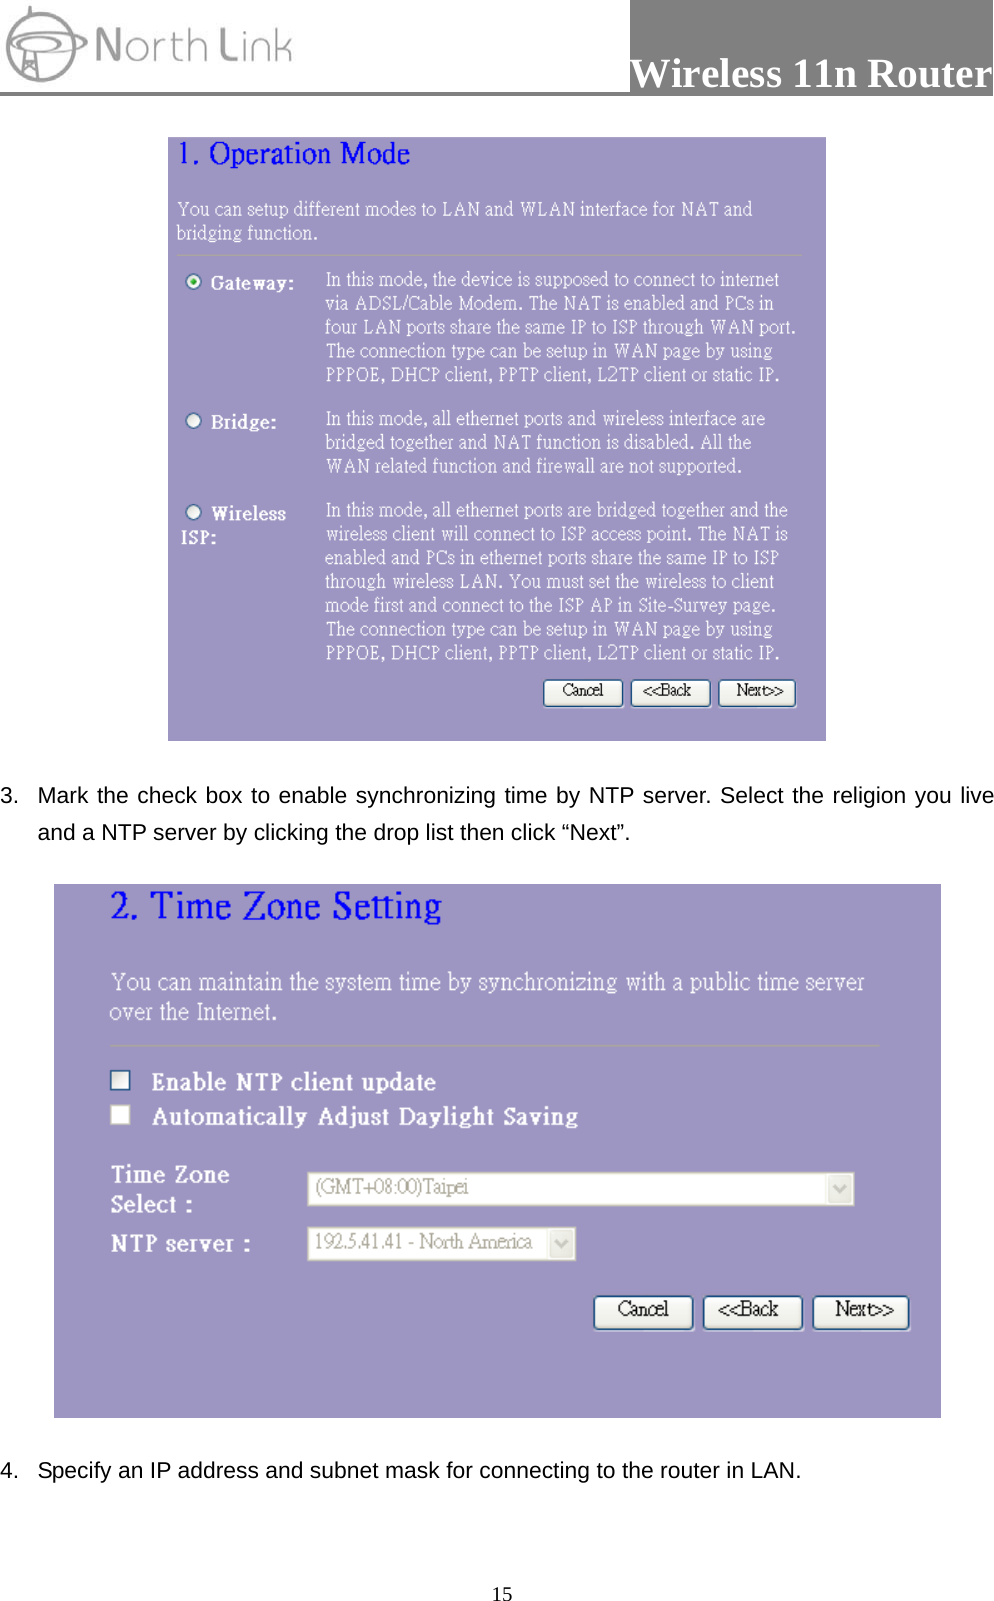                 Wireless 11n Router   15 3.  Mark the check box to enable synchronizing time by NTP server. Select the religion you live and a NTP server by clicking the drop list then click “Next”.  4.  Specify an IP address and subnet mask for connecting to the router in LAN. 